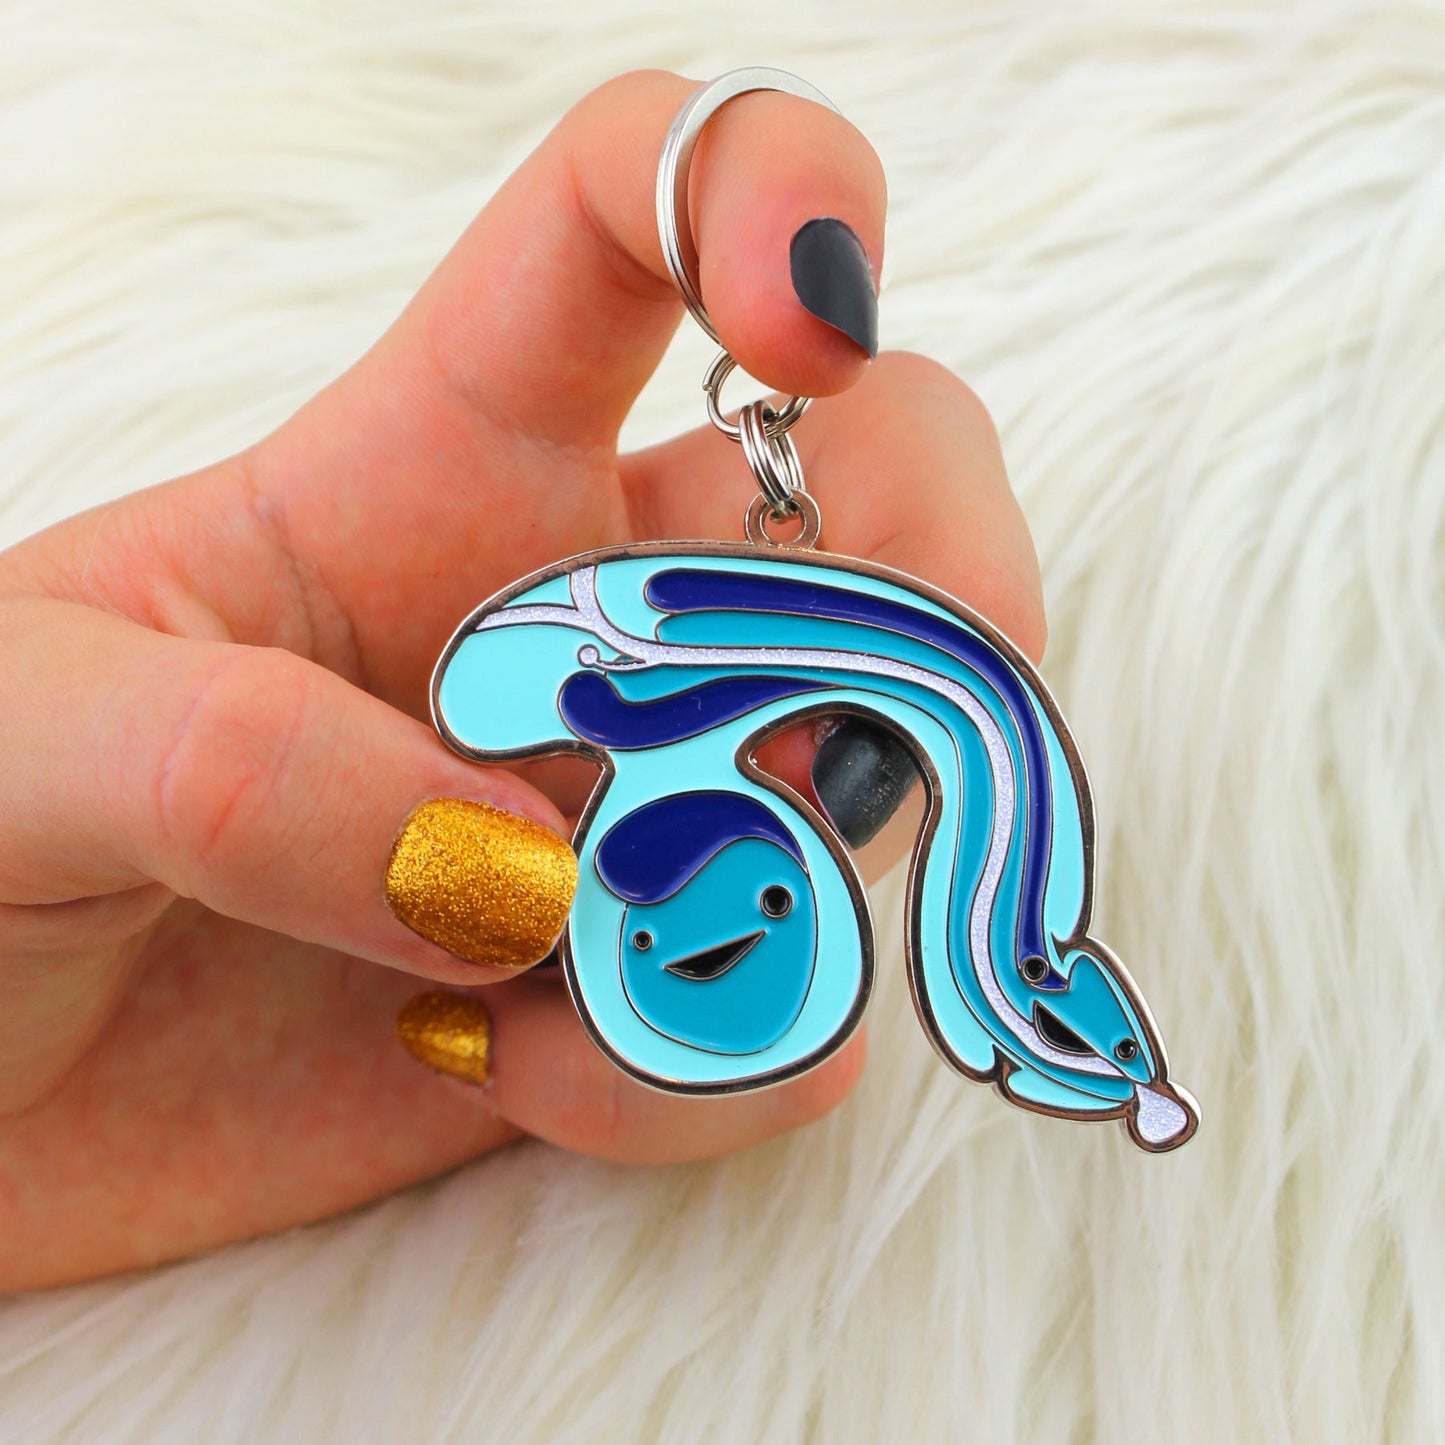 Blue Peen Keychain with Sparkly Anatomical Plumbing